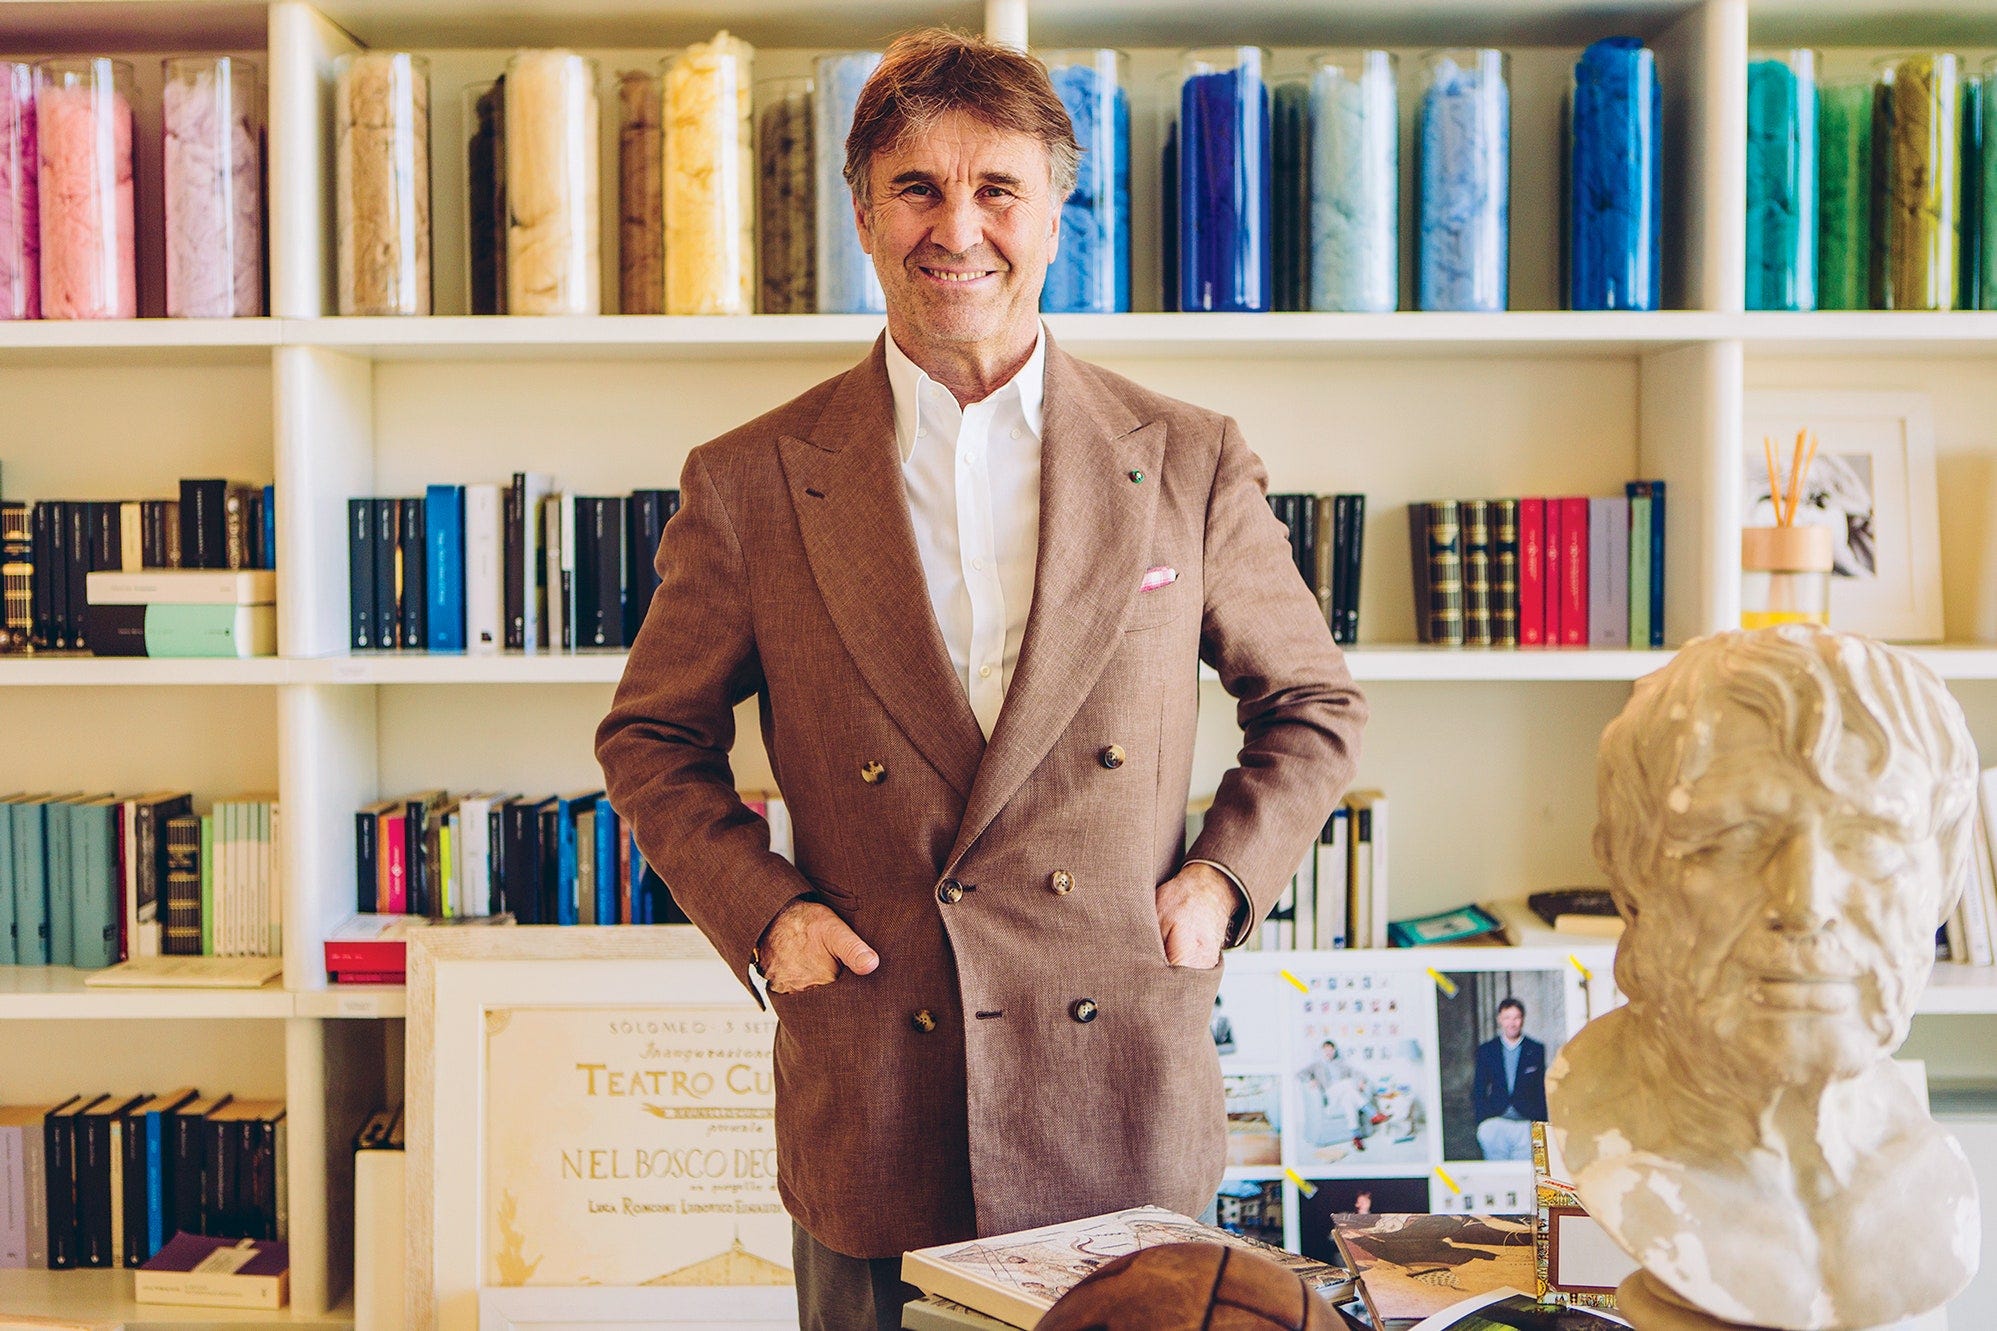 Brunello Cucinelli: Philosopher King or Steward of Small Town Life?